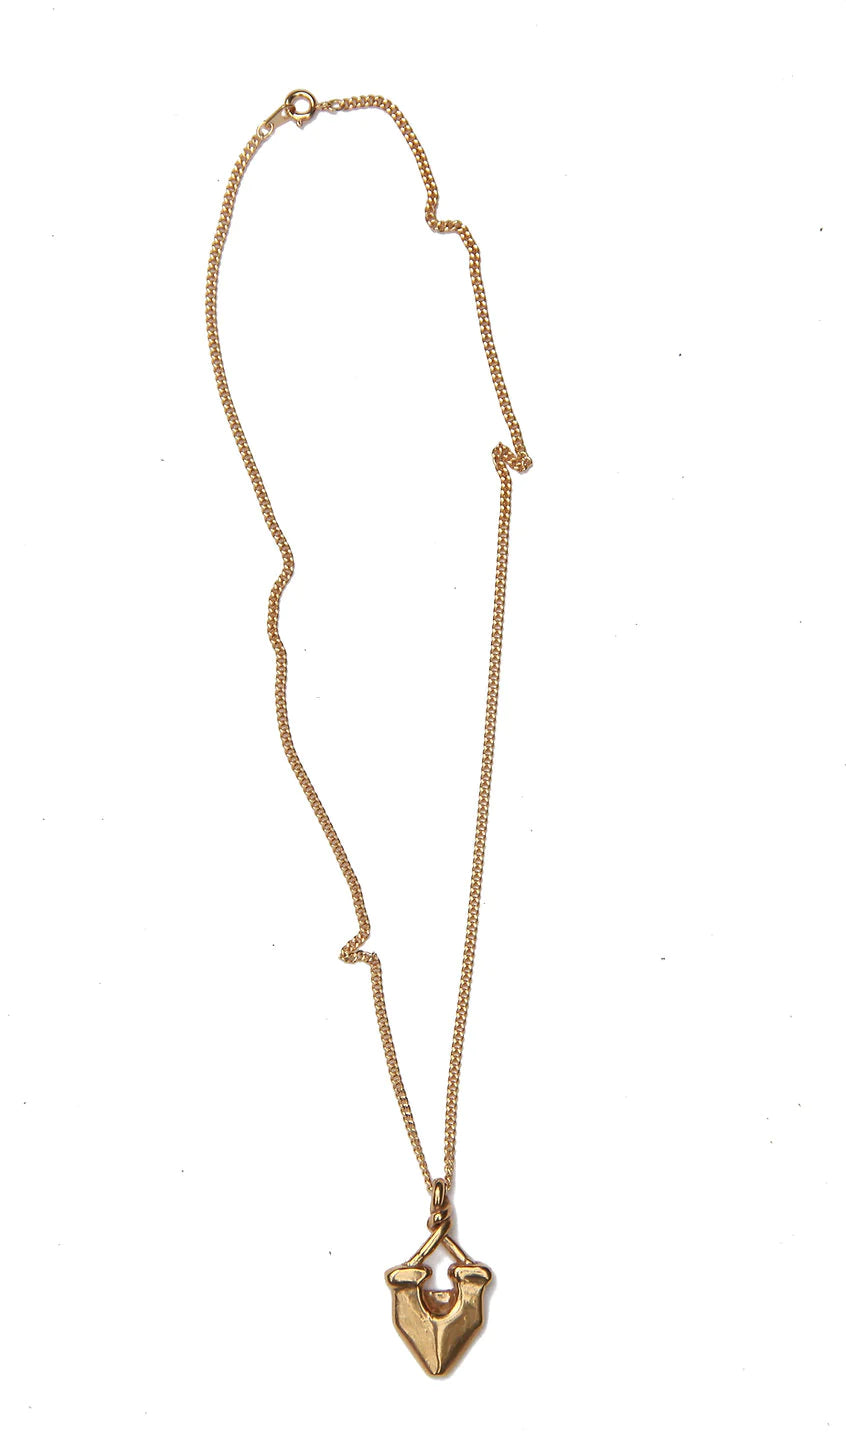 WATER SAND STONE | BALLAST NECKLACE